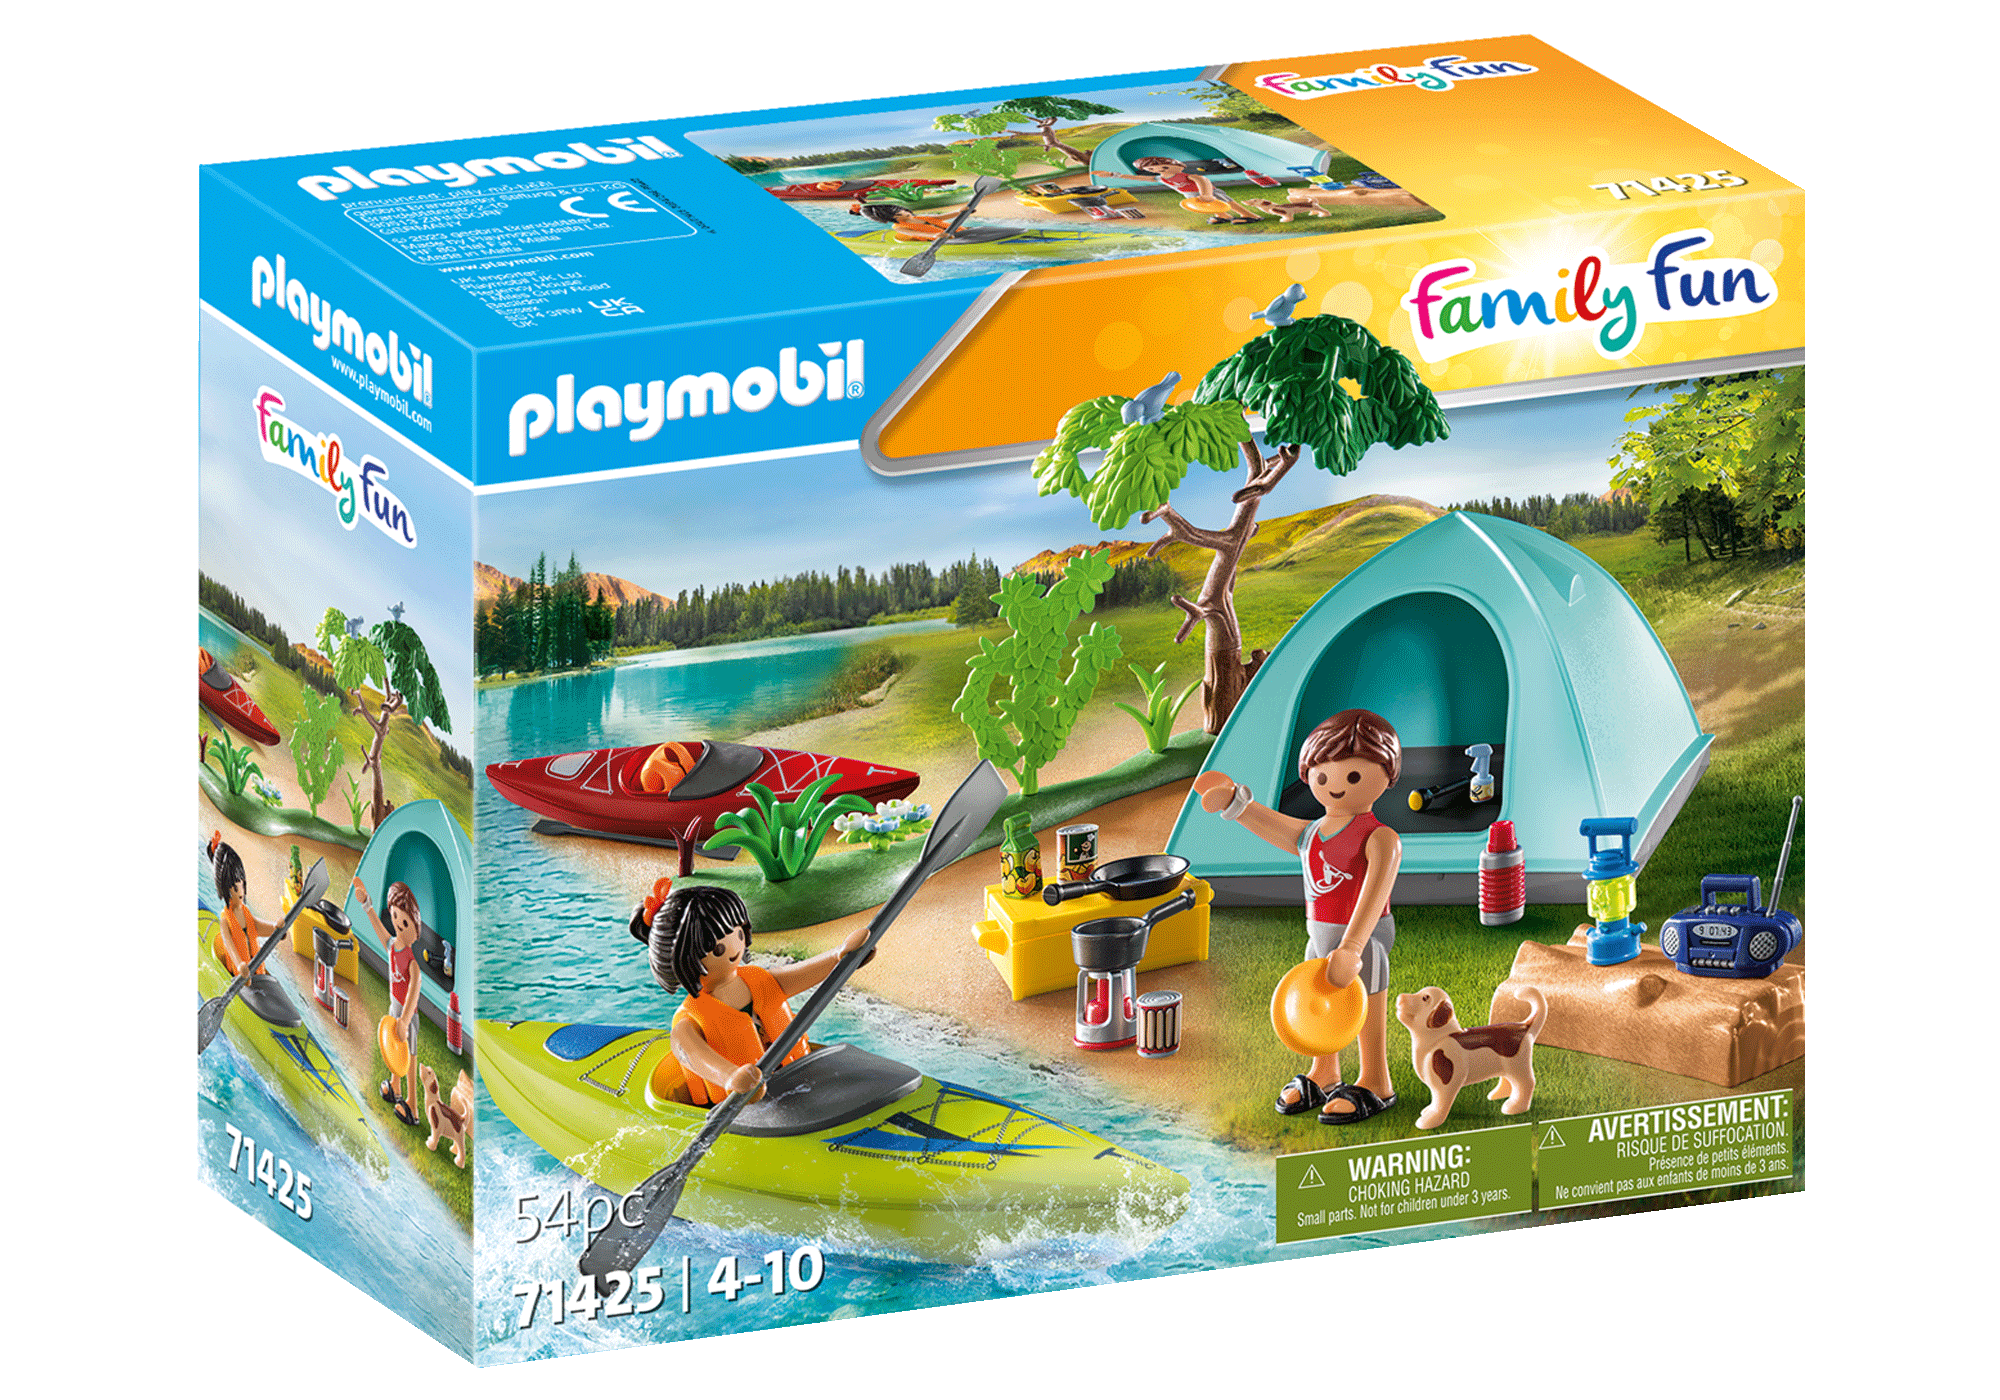 Playmobil Family Fun Campsite With Campfire